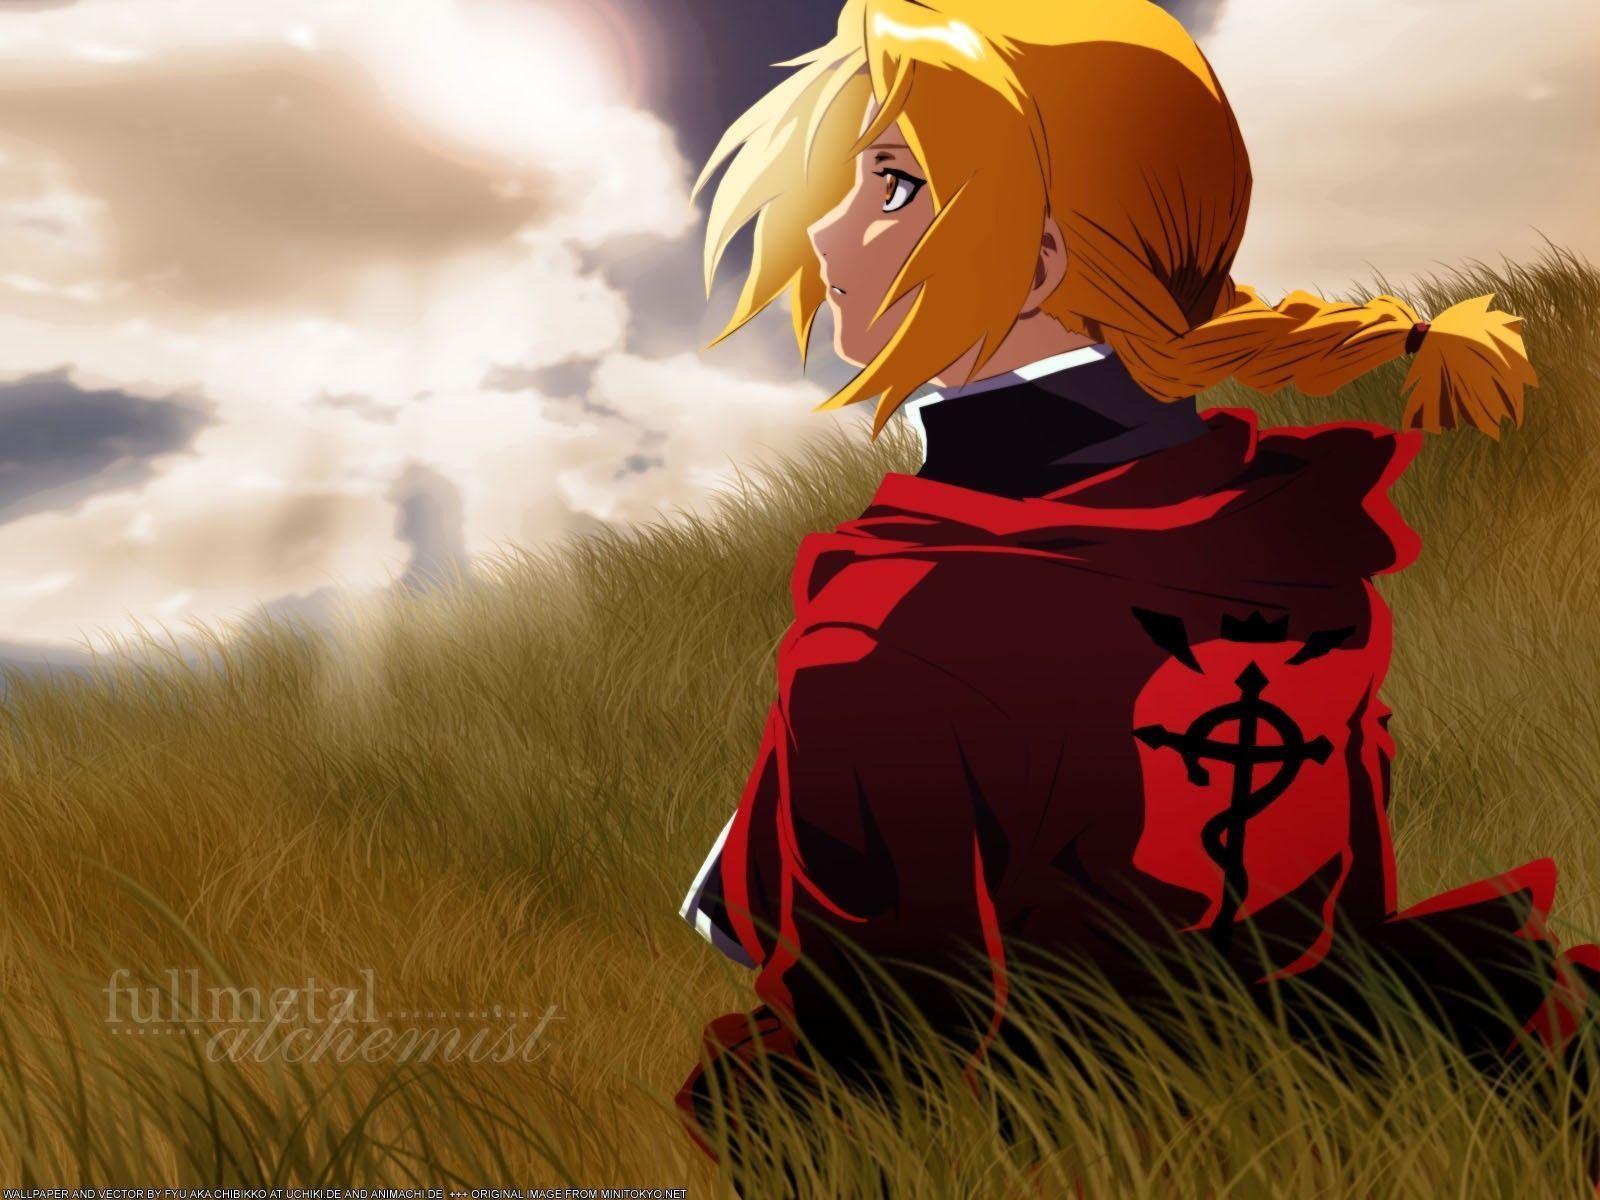 edward elric wallpapers wallpaper cave on edward elric wallpaper